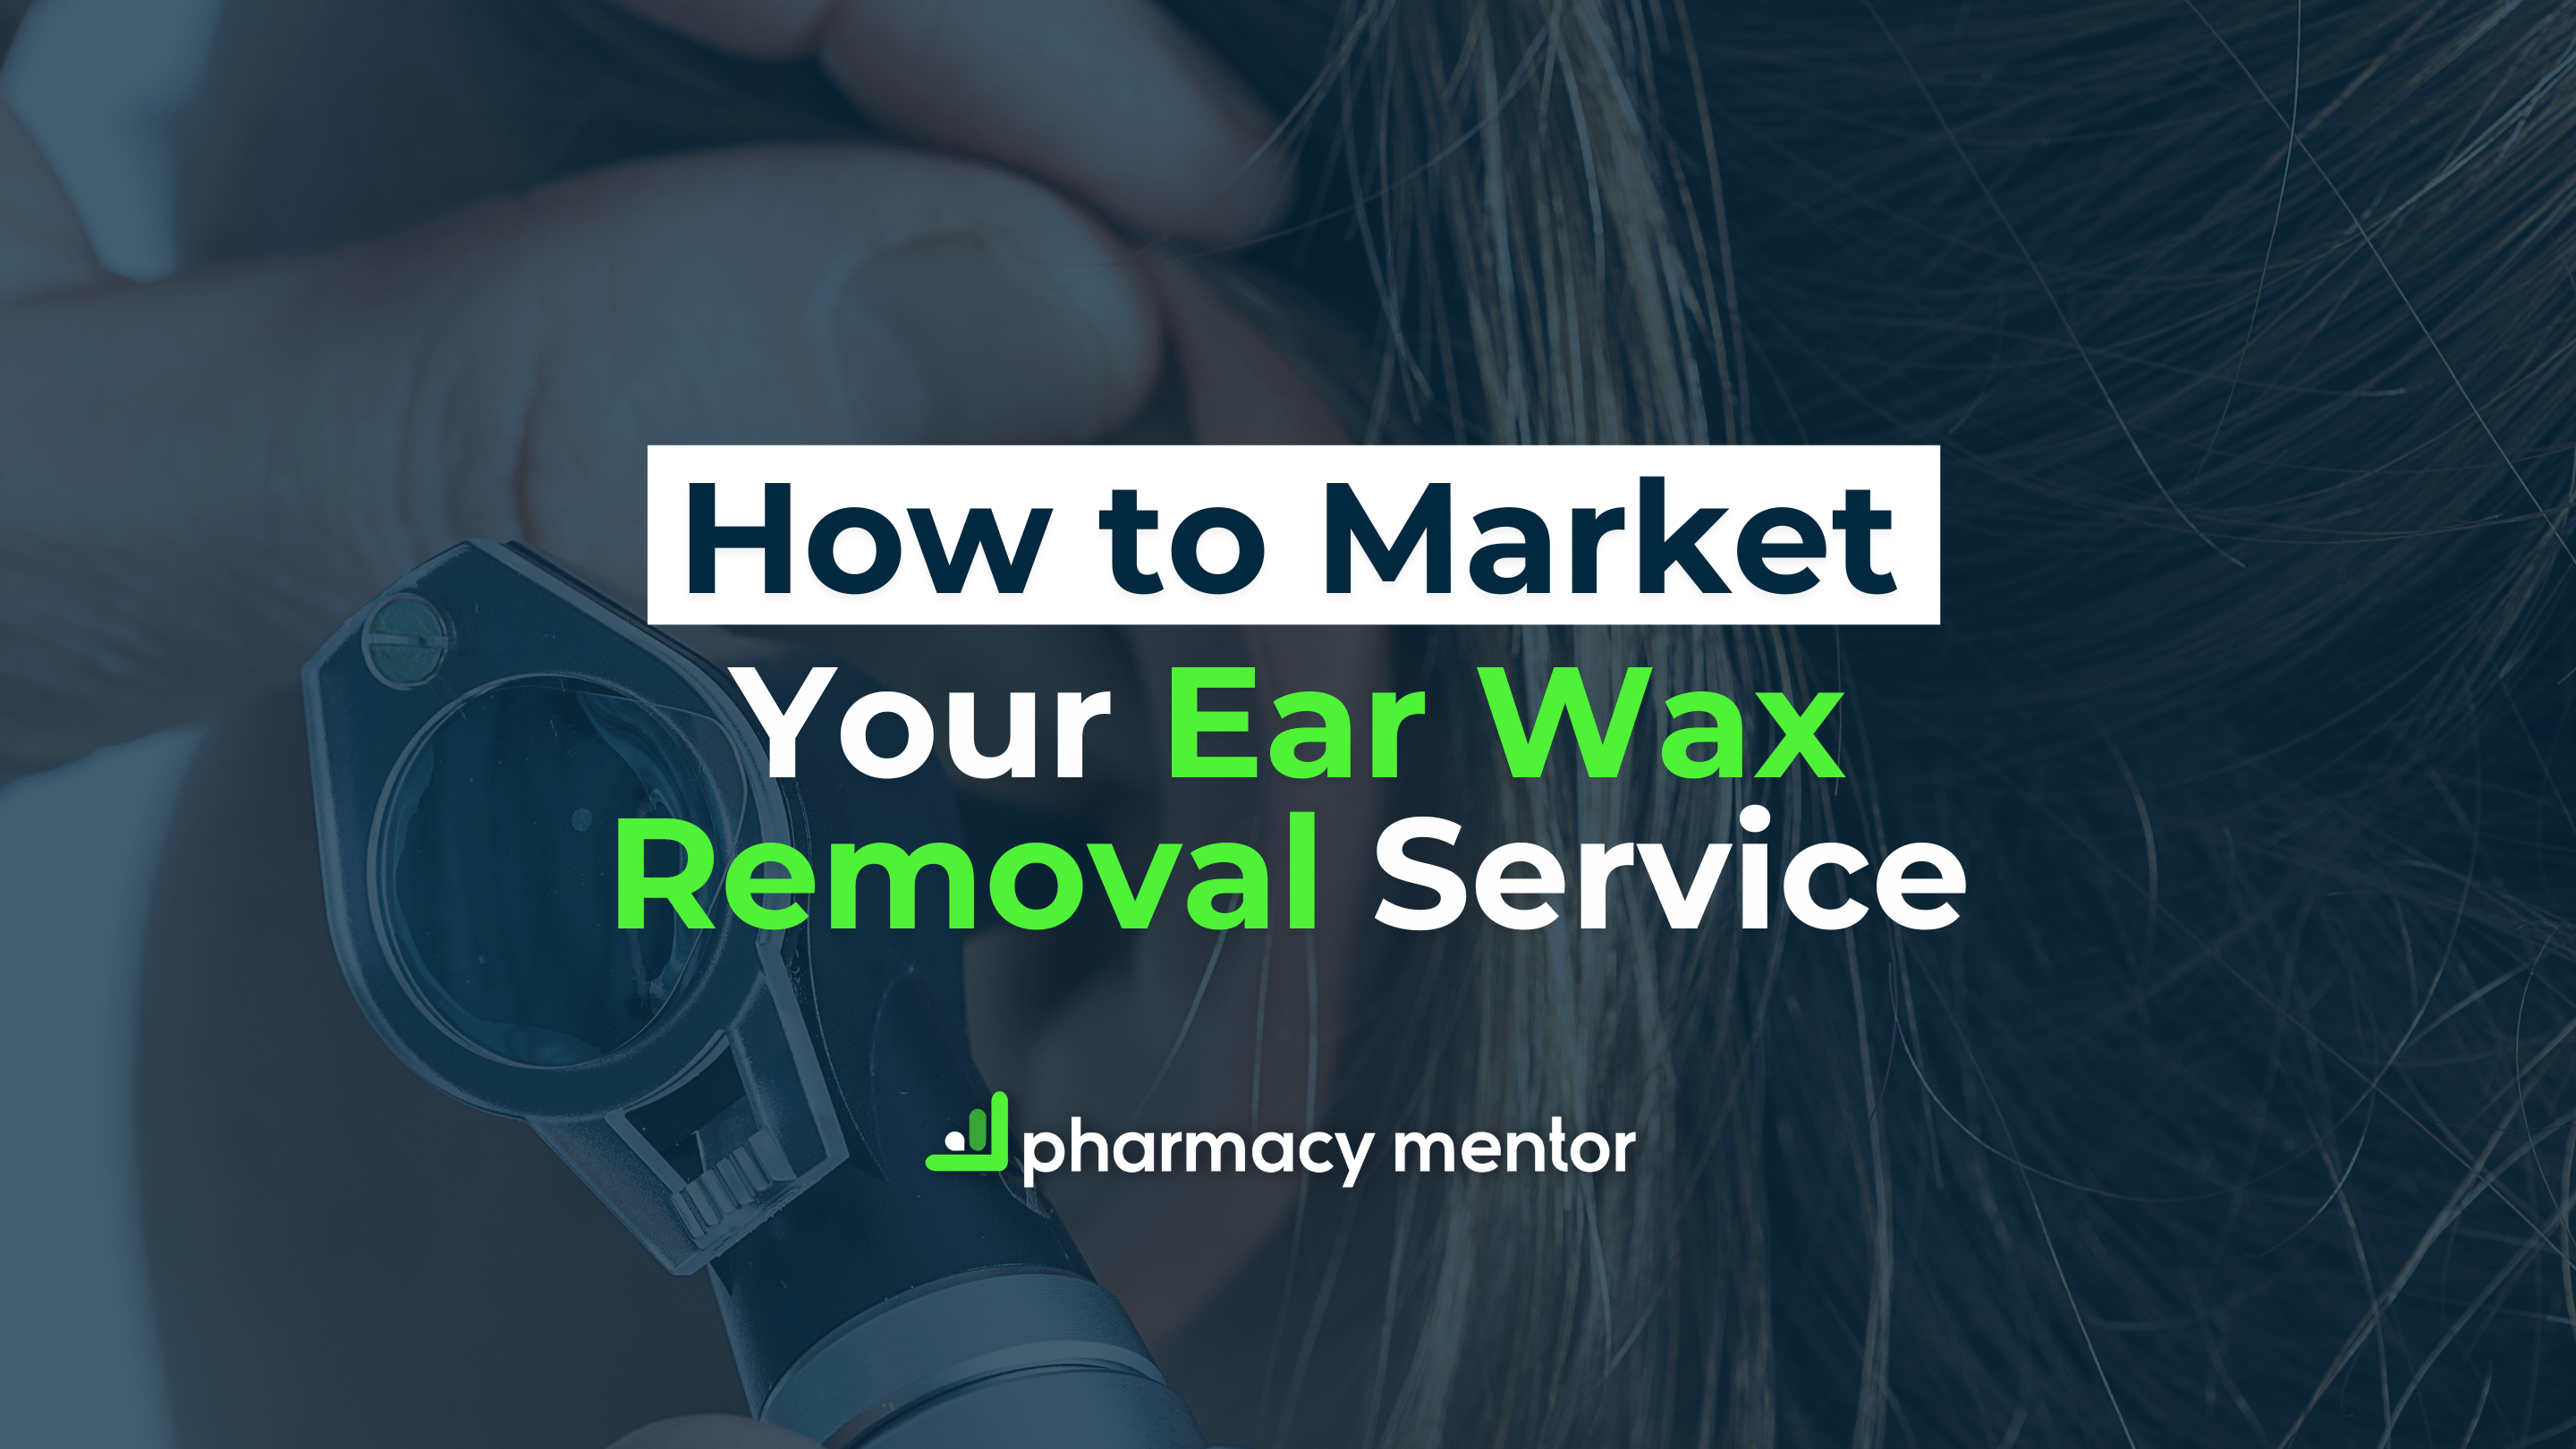 How to Market Your Ear Wax Removal Service - Pharmacy Mentor